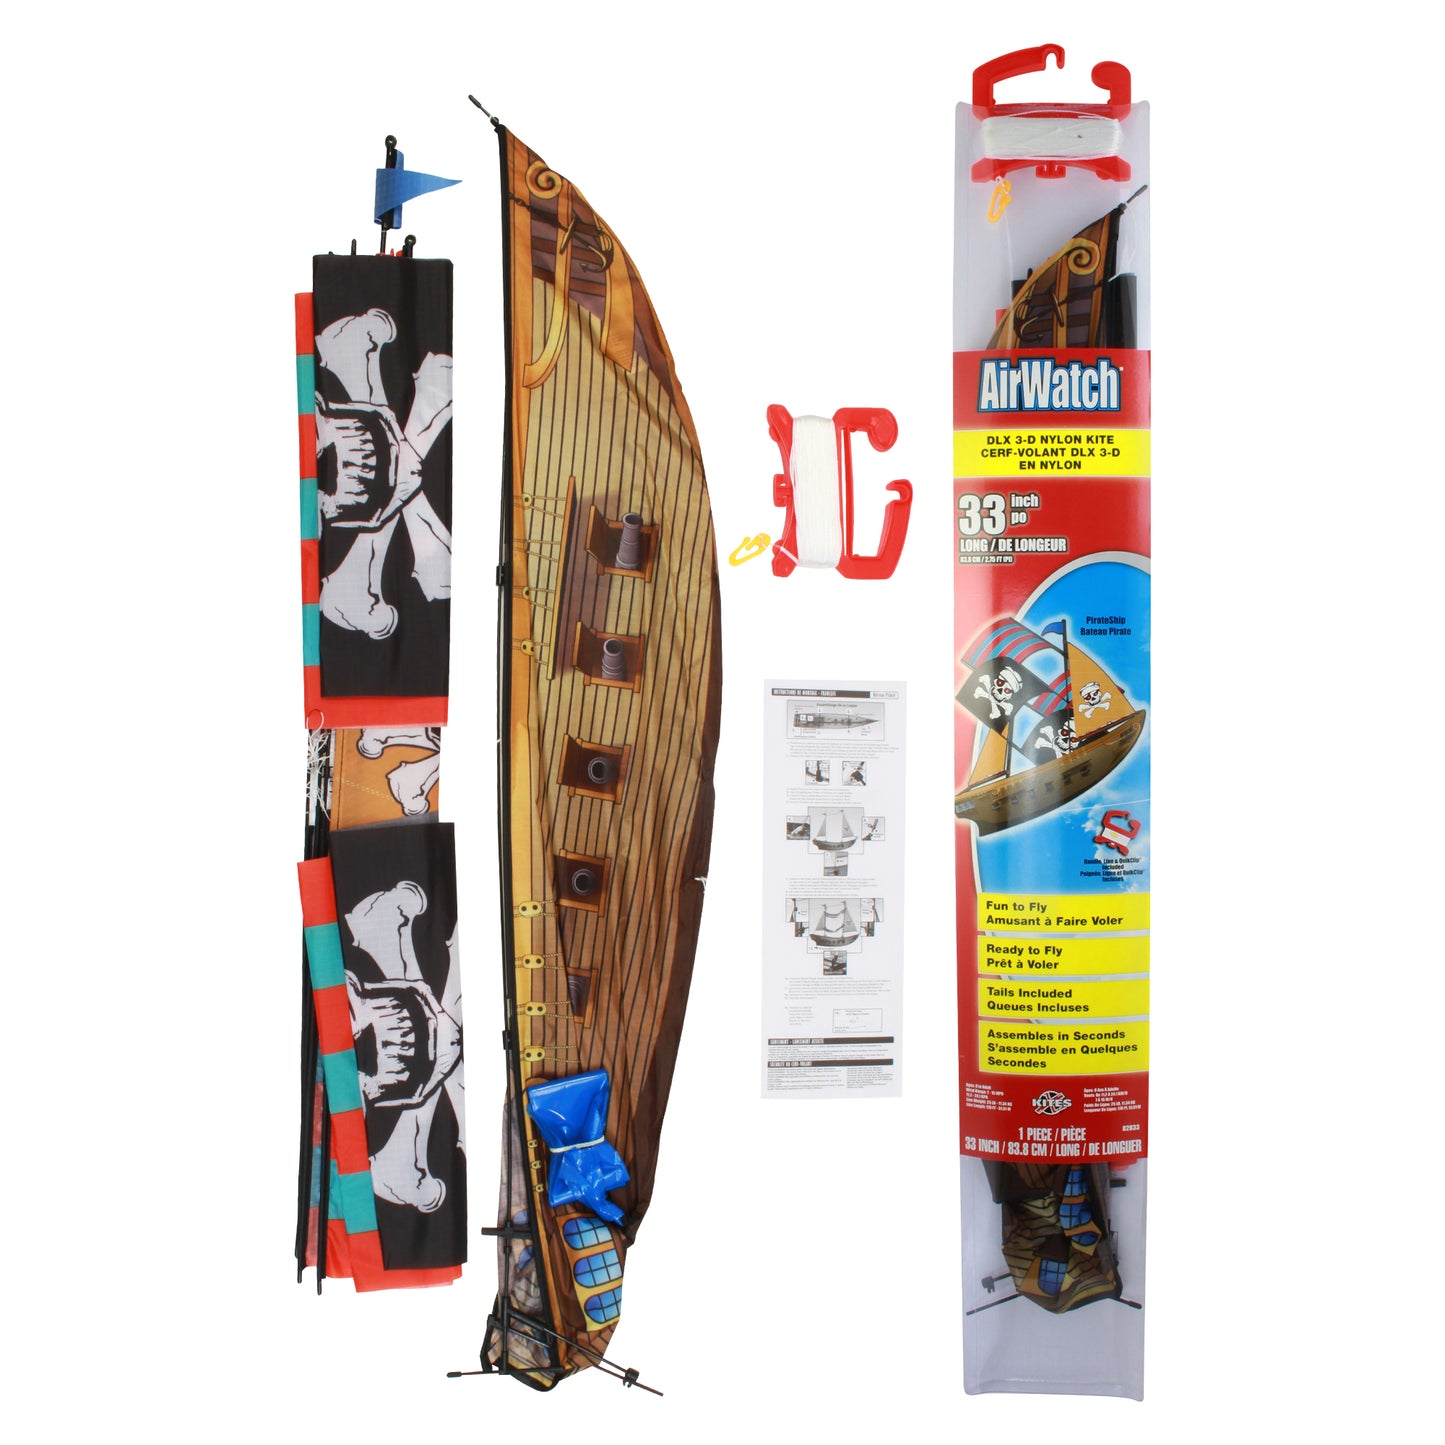 X Kites Air Watch PirateShip DLX 3D Nylon Kite packaging and contents